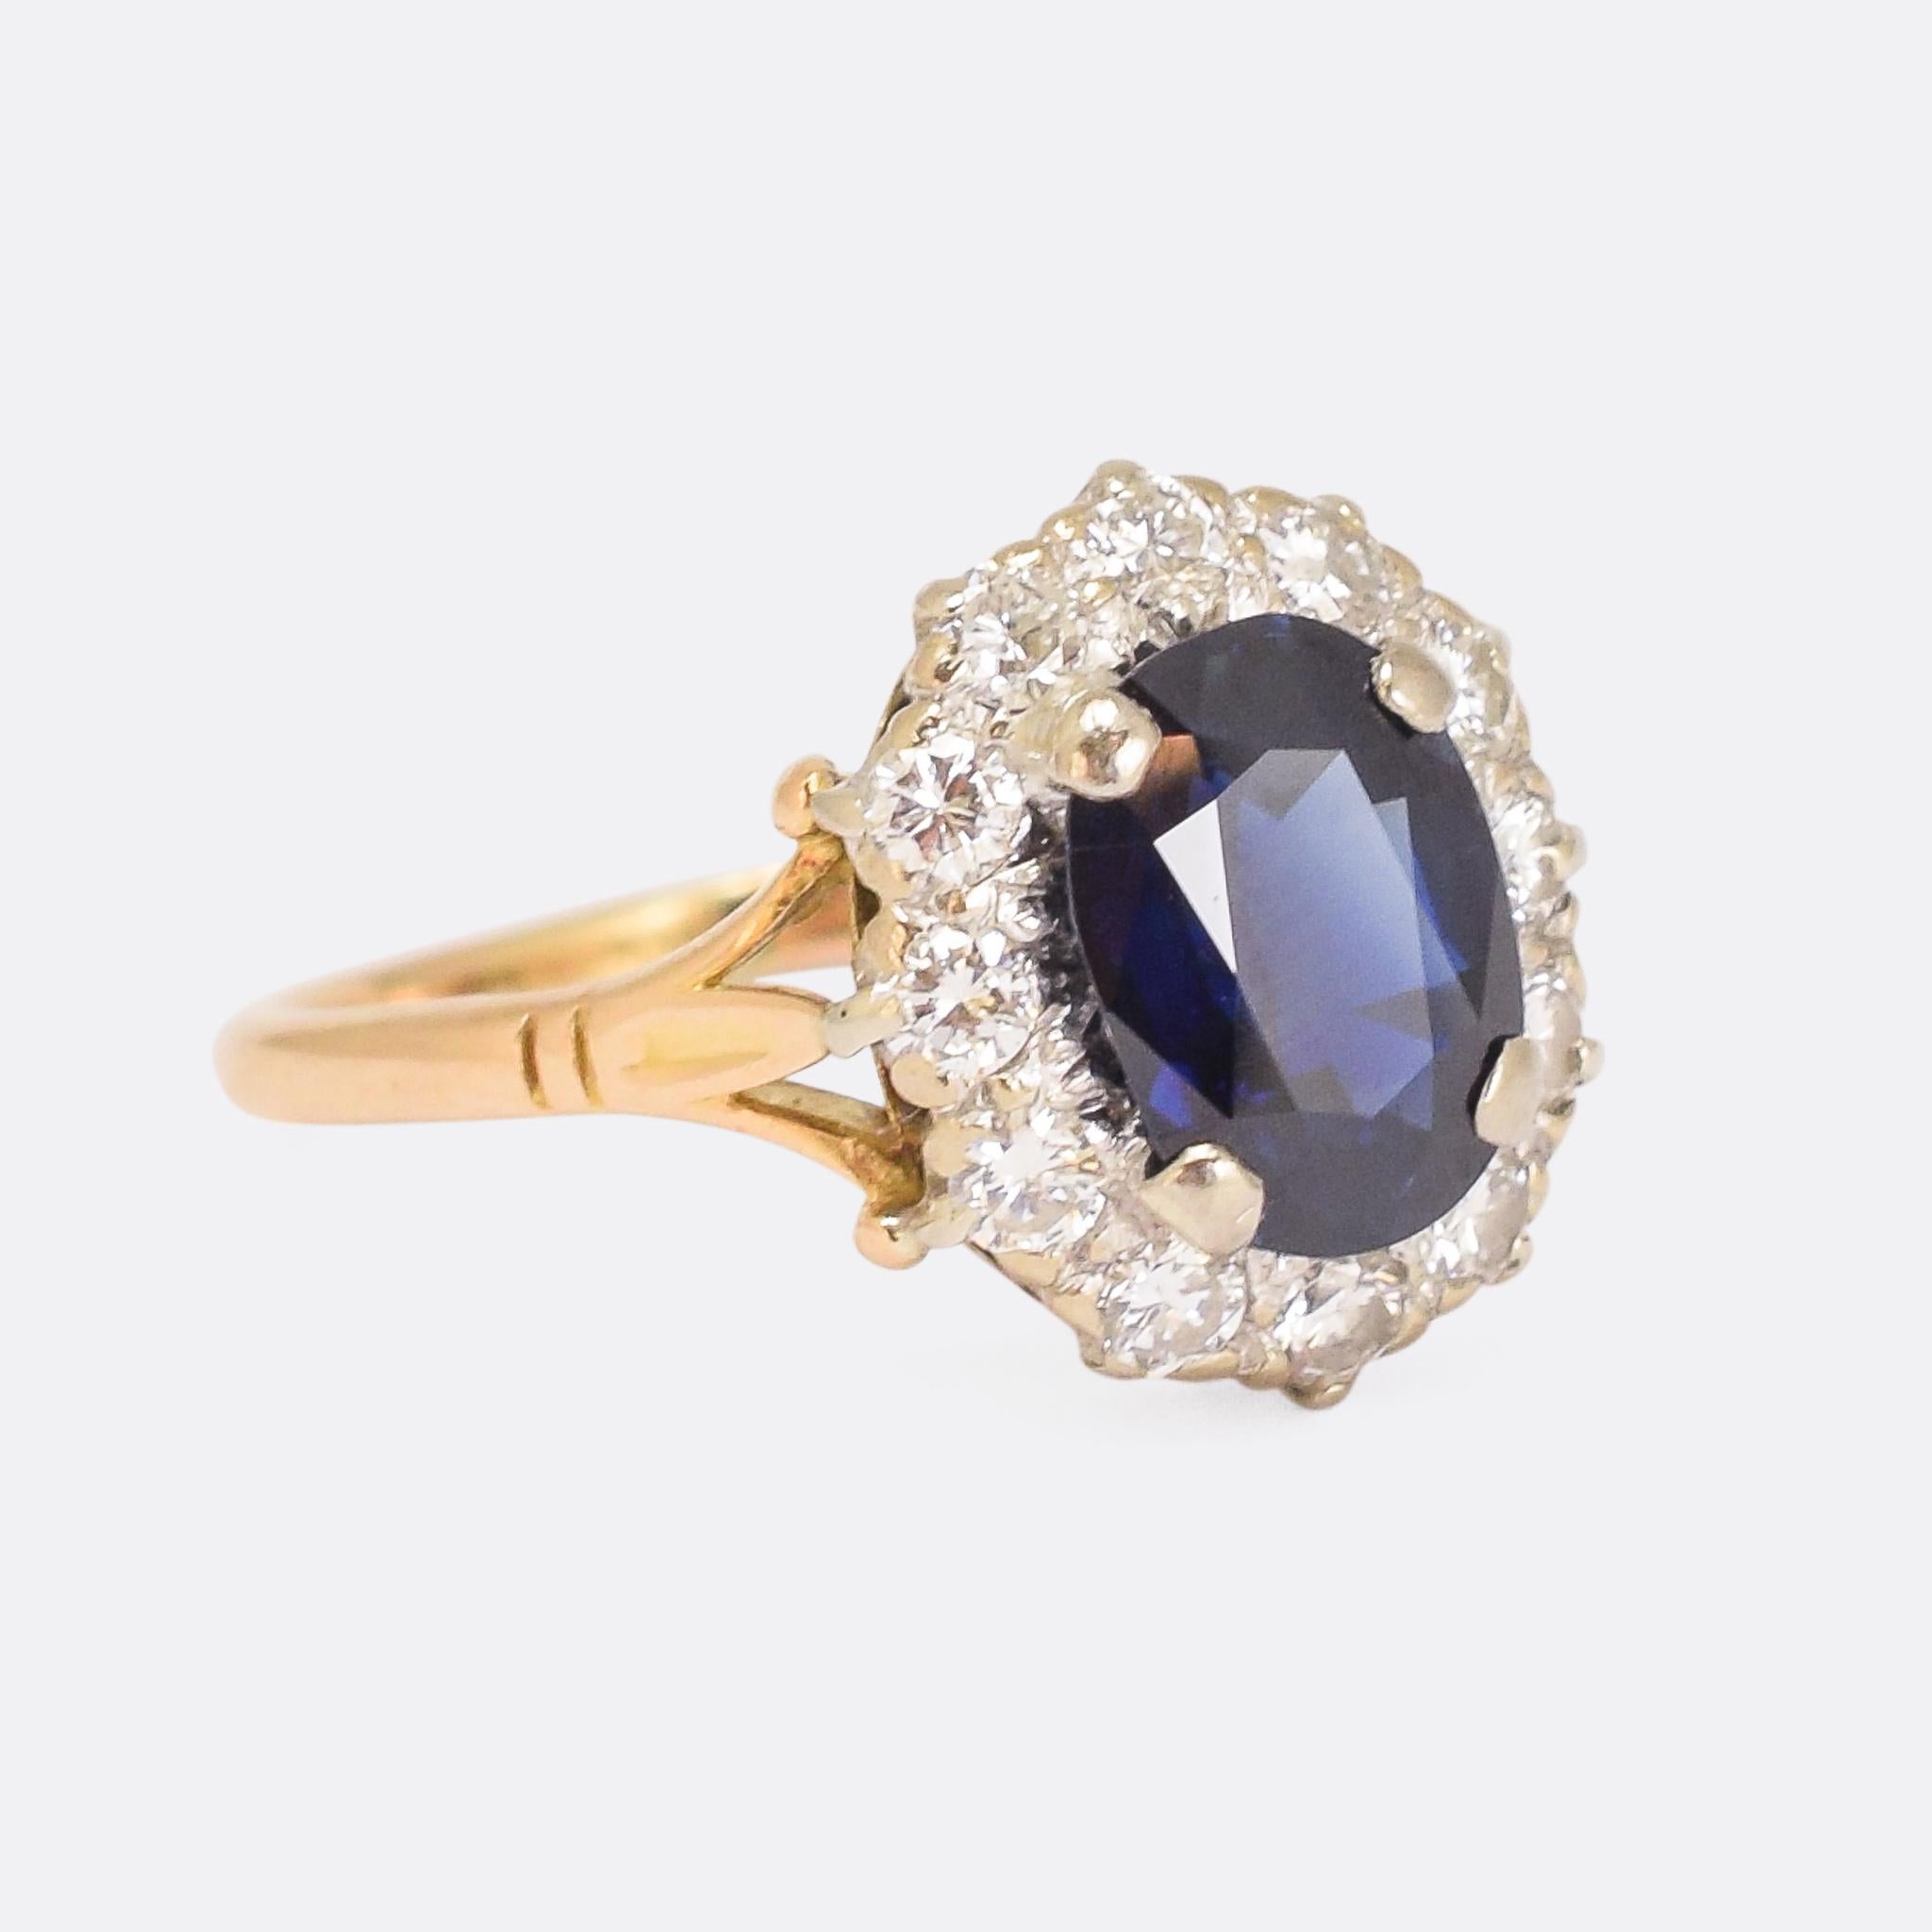 An exceptional antique sapphire and diamond engagement ring dating from the 1920s. The principal stone is a natural no-heat cushion shaped sapphire, certified at 2.7 carats, and it's surrounded by a halo of bright brilliant cut diamonds. The band is